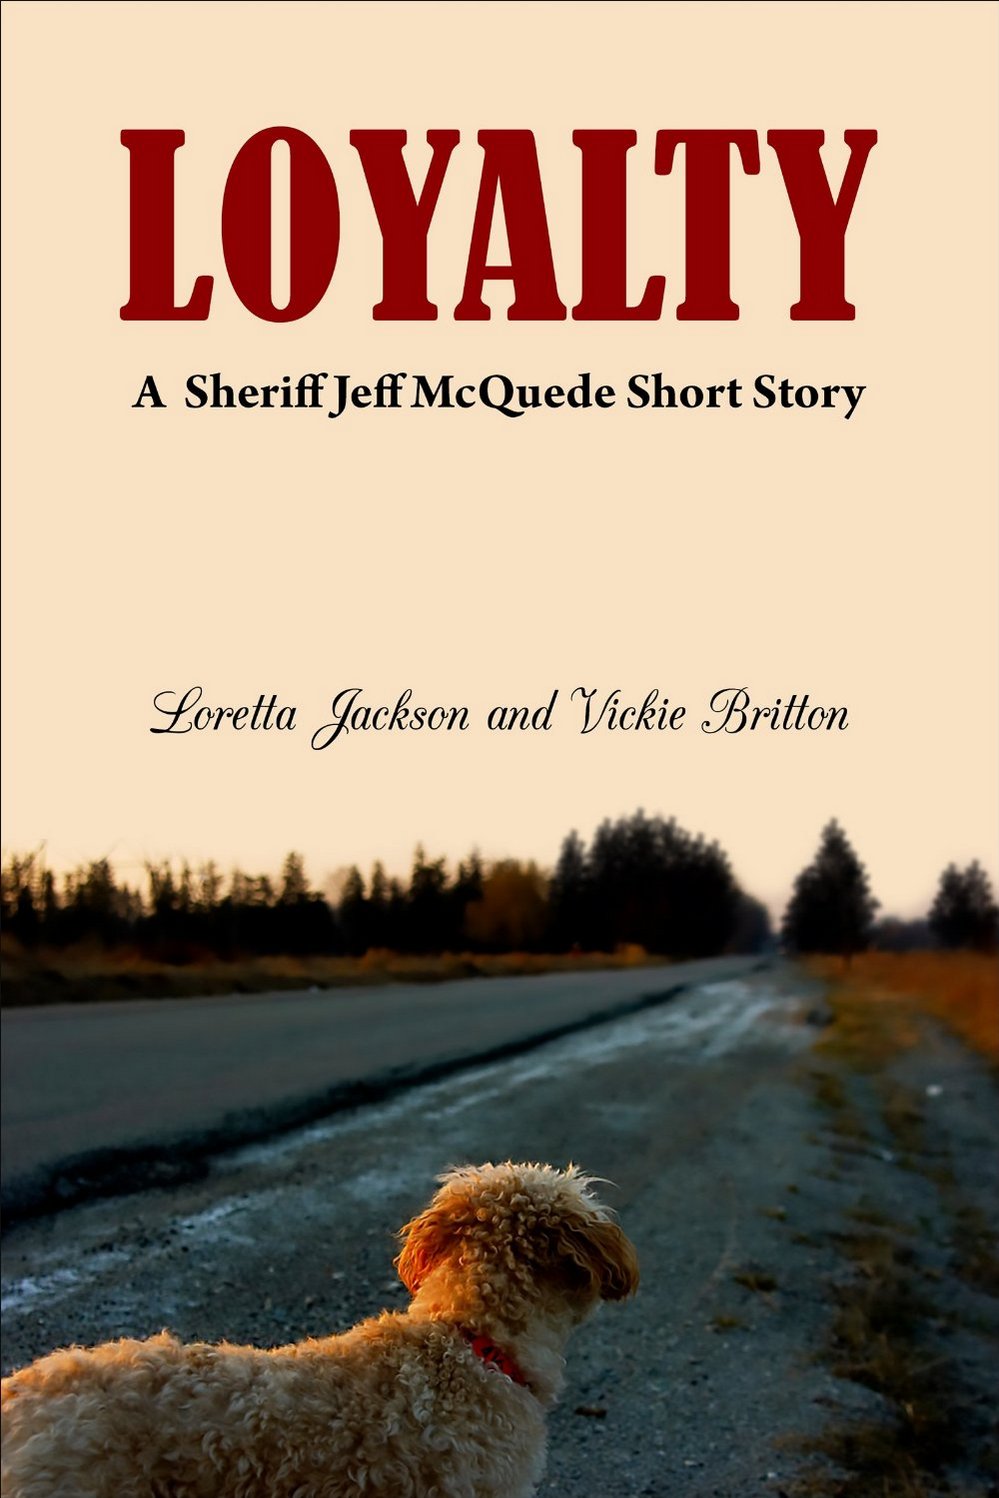 READ LOYALTY A Jeff McQuede short story 99c on KINDLE!